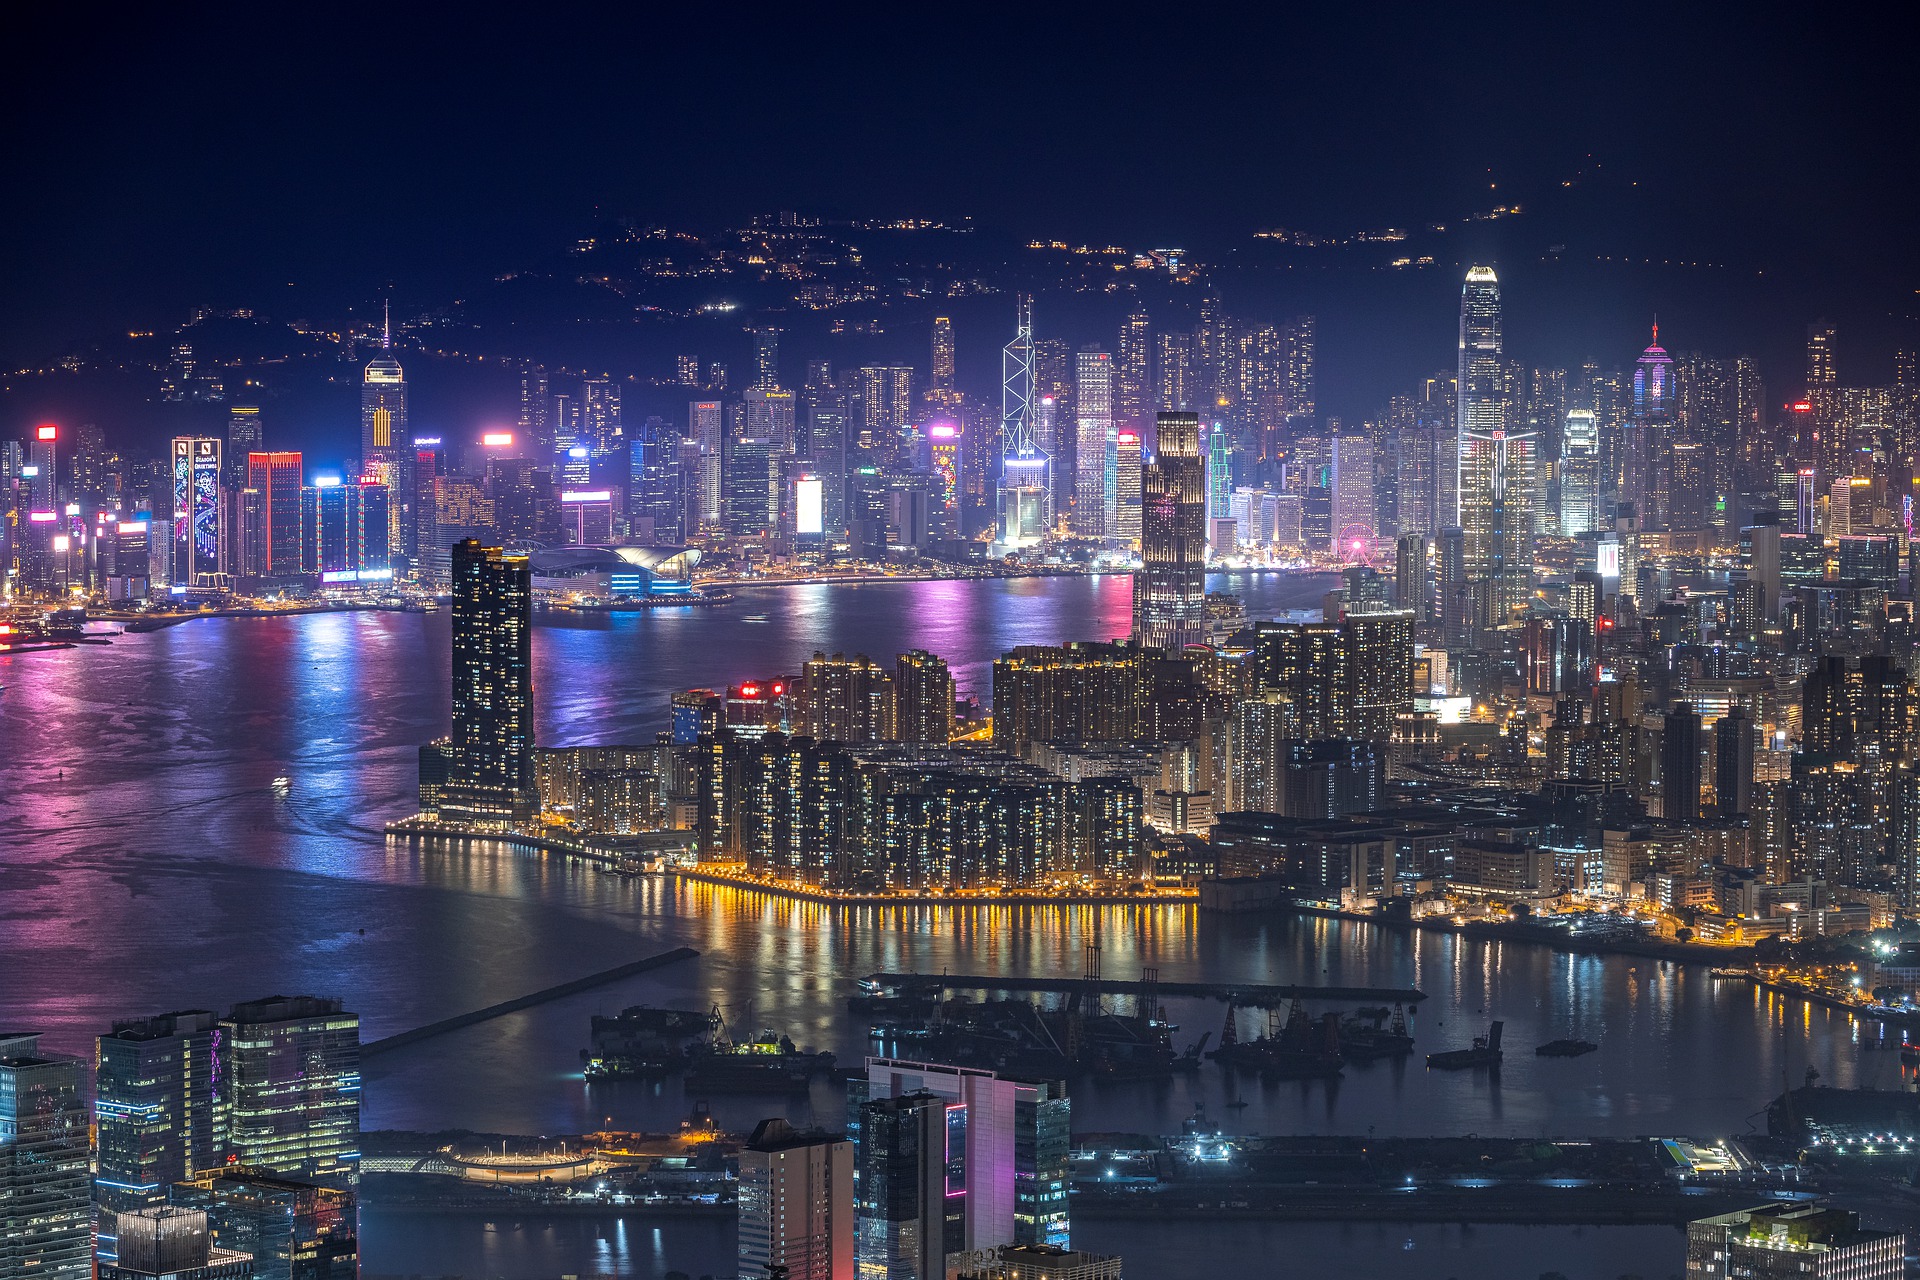 the hong kong skyline and waterway at night with glowing neon lights and skyscrapers